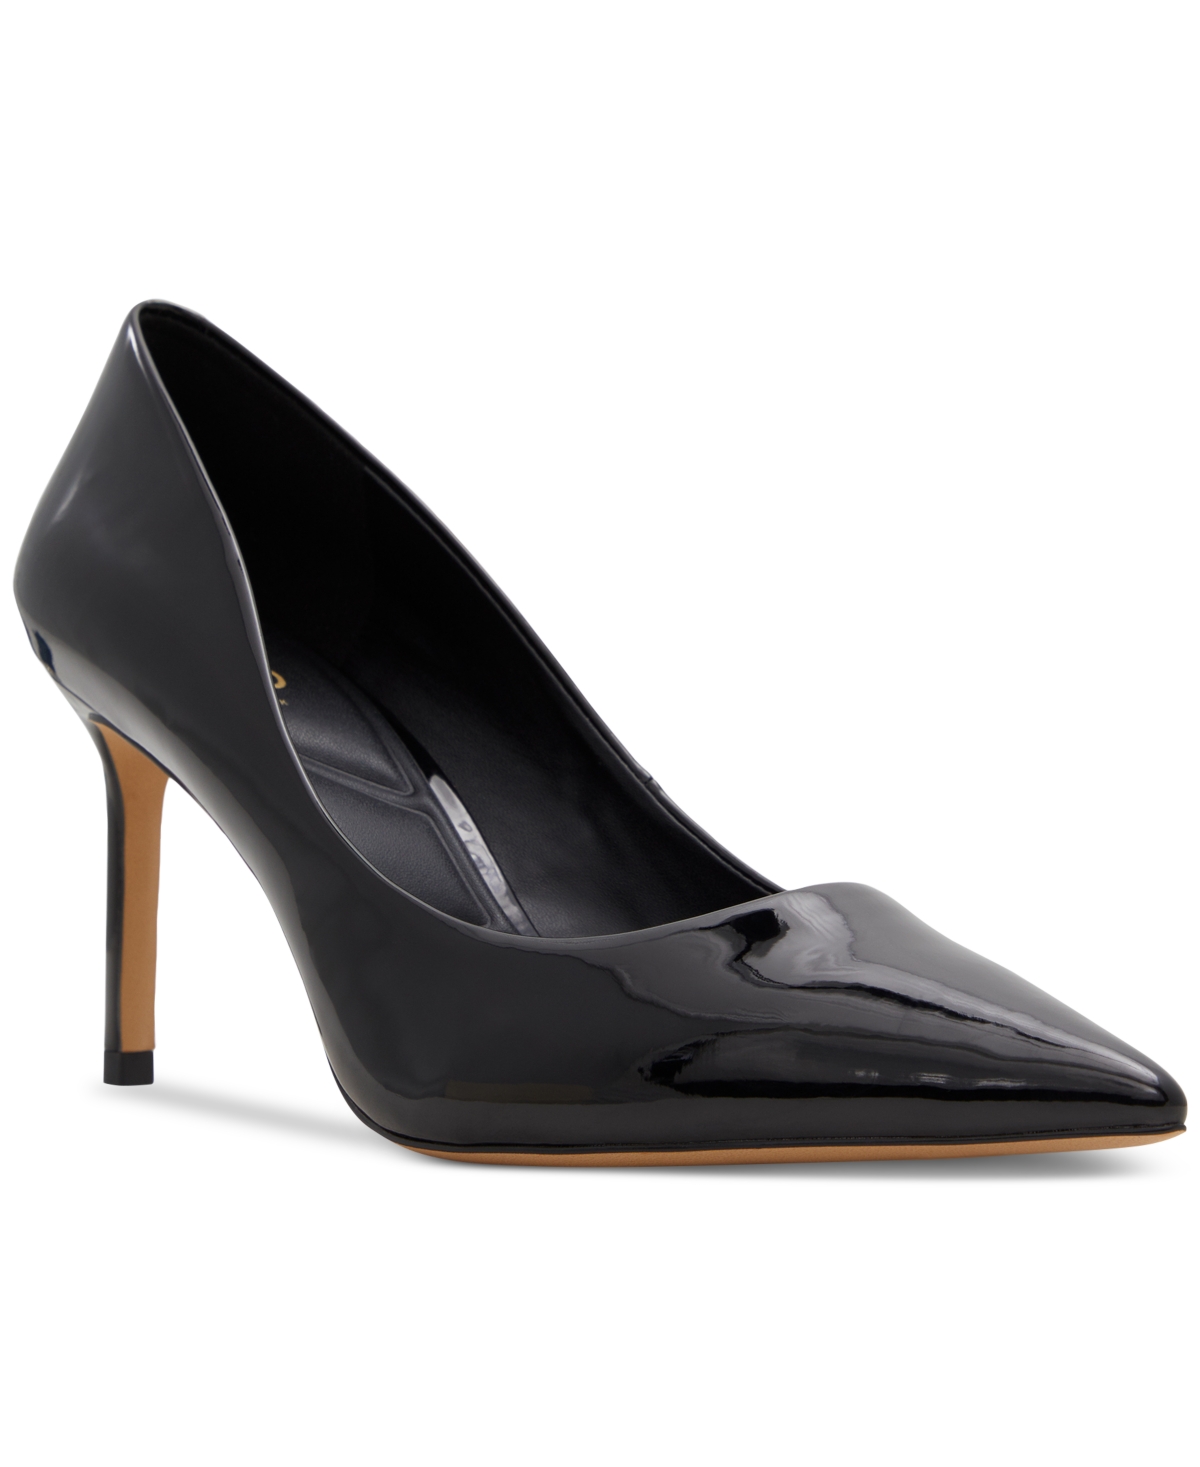 Women's Stessy Pointed-Toe Pumps - Black Patent